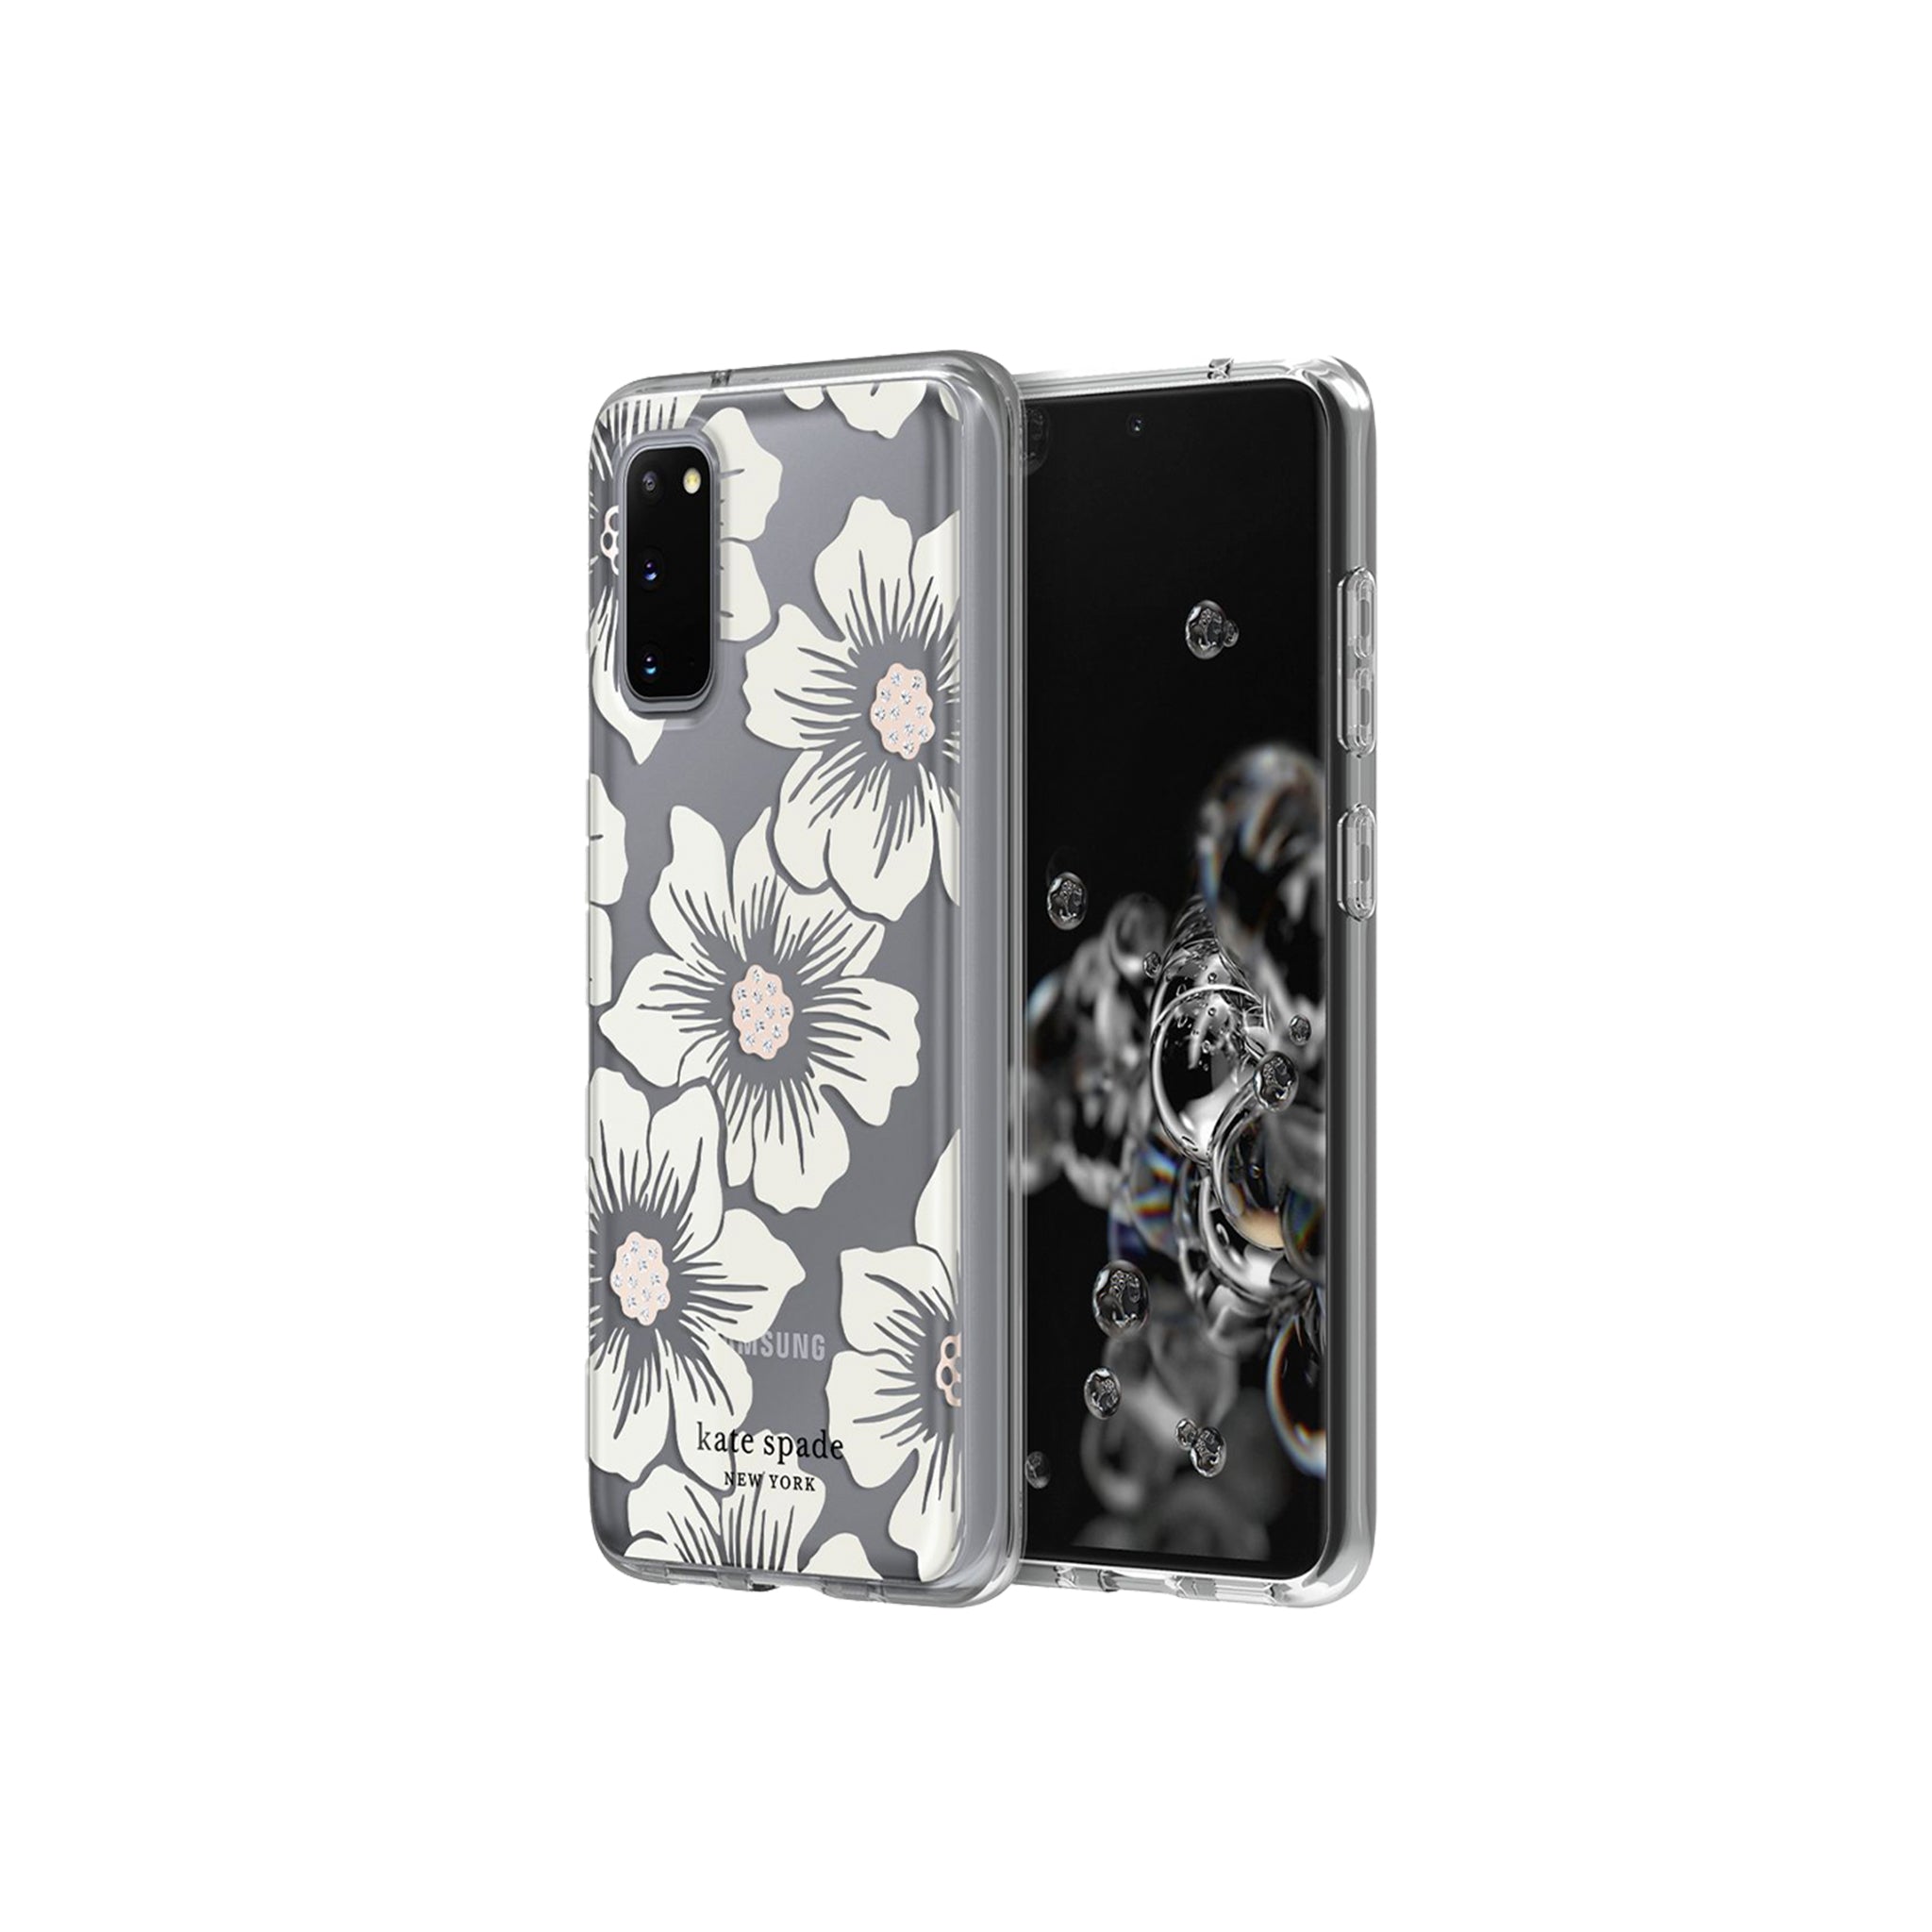 Kate Spade - Hardshell Case For Samsung Galaxy S20 / S20 5g Uw - Hollyhock Floral